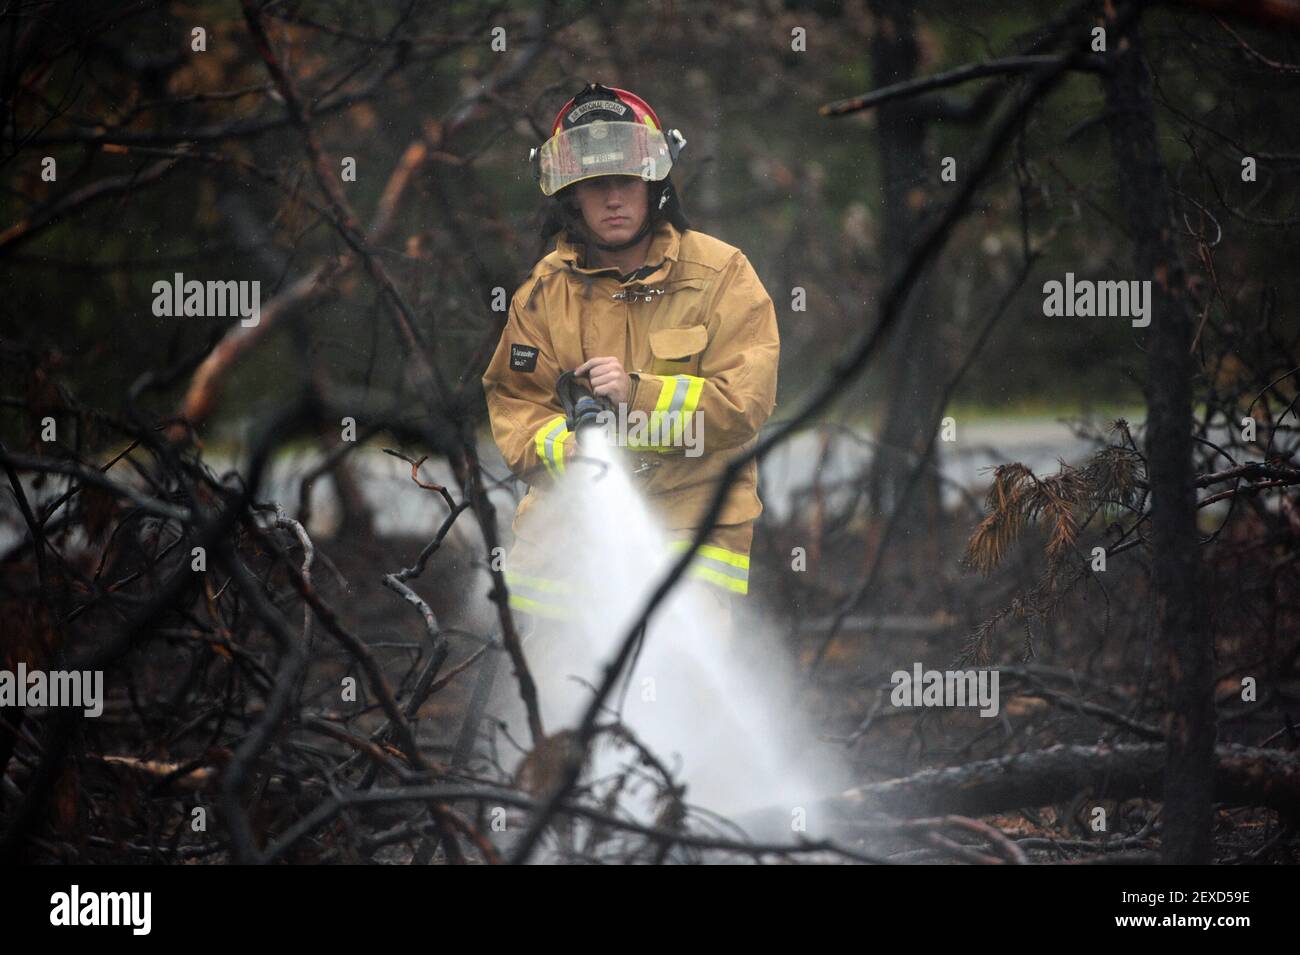 Senior Airman Brandon L. Ehlers, a firefighter with the 106th Rescue Wing, sprays down a burned area of woods Aug. 21, 2015, in Westhampton Beach, N.Y. Multiple agencies and fire departments responded to a major brush fire in the area. Firefighters from the 106th RQW checked for hot spots, which was a serious concern due to the dry weather during the previous week. (Photo by Staff Sgt. Christopher S. Muncy/New York Air National Guard) *** Please Use Credit from Credit Field *** Stock Photo